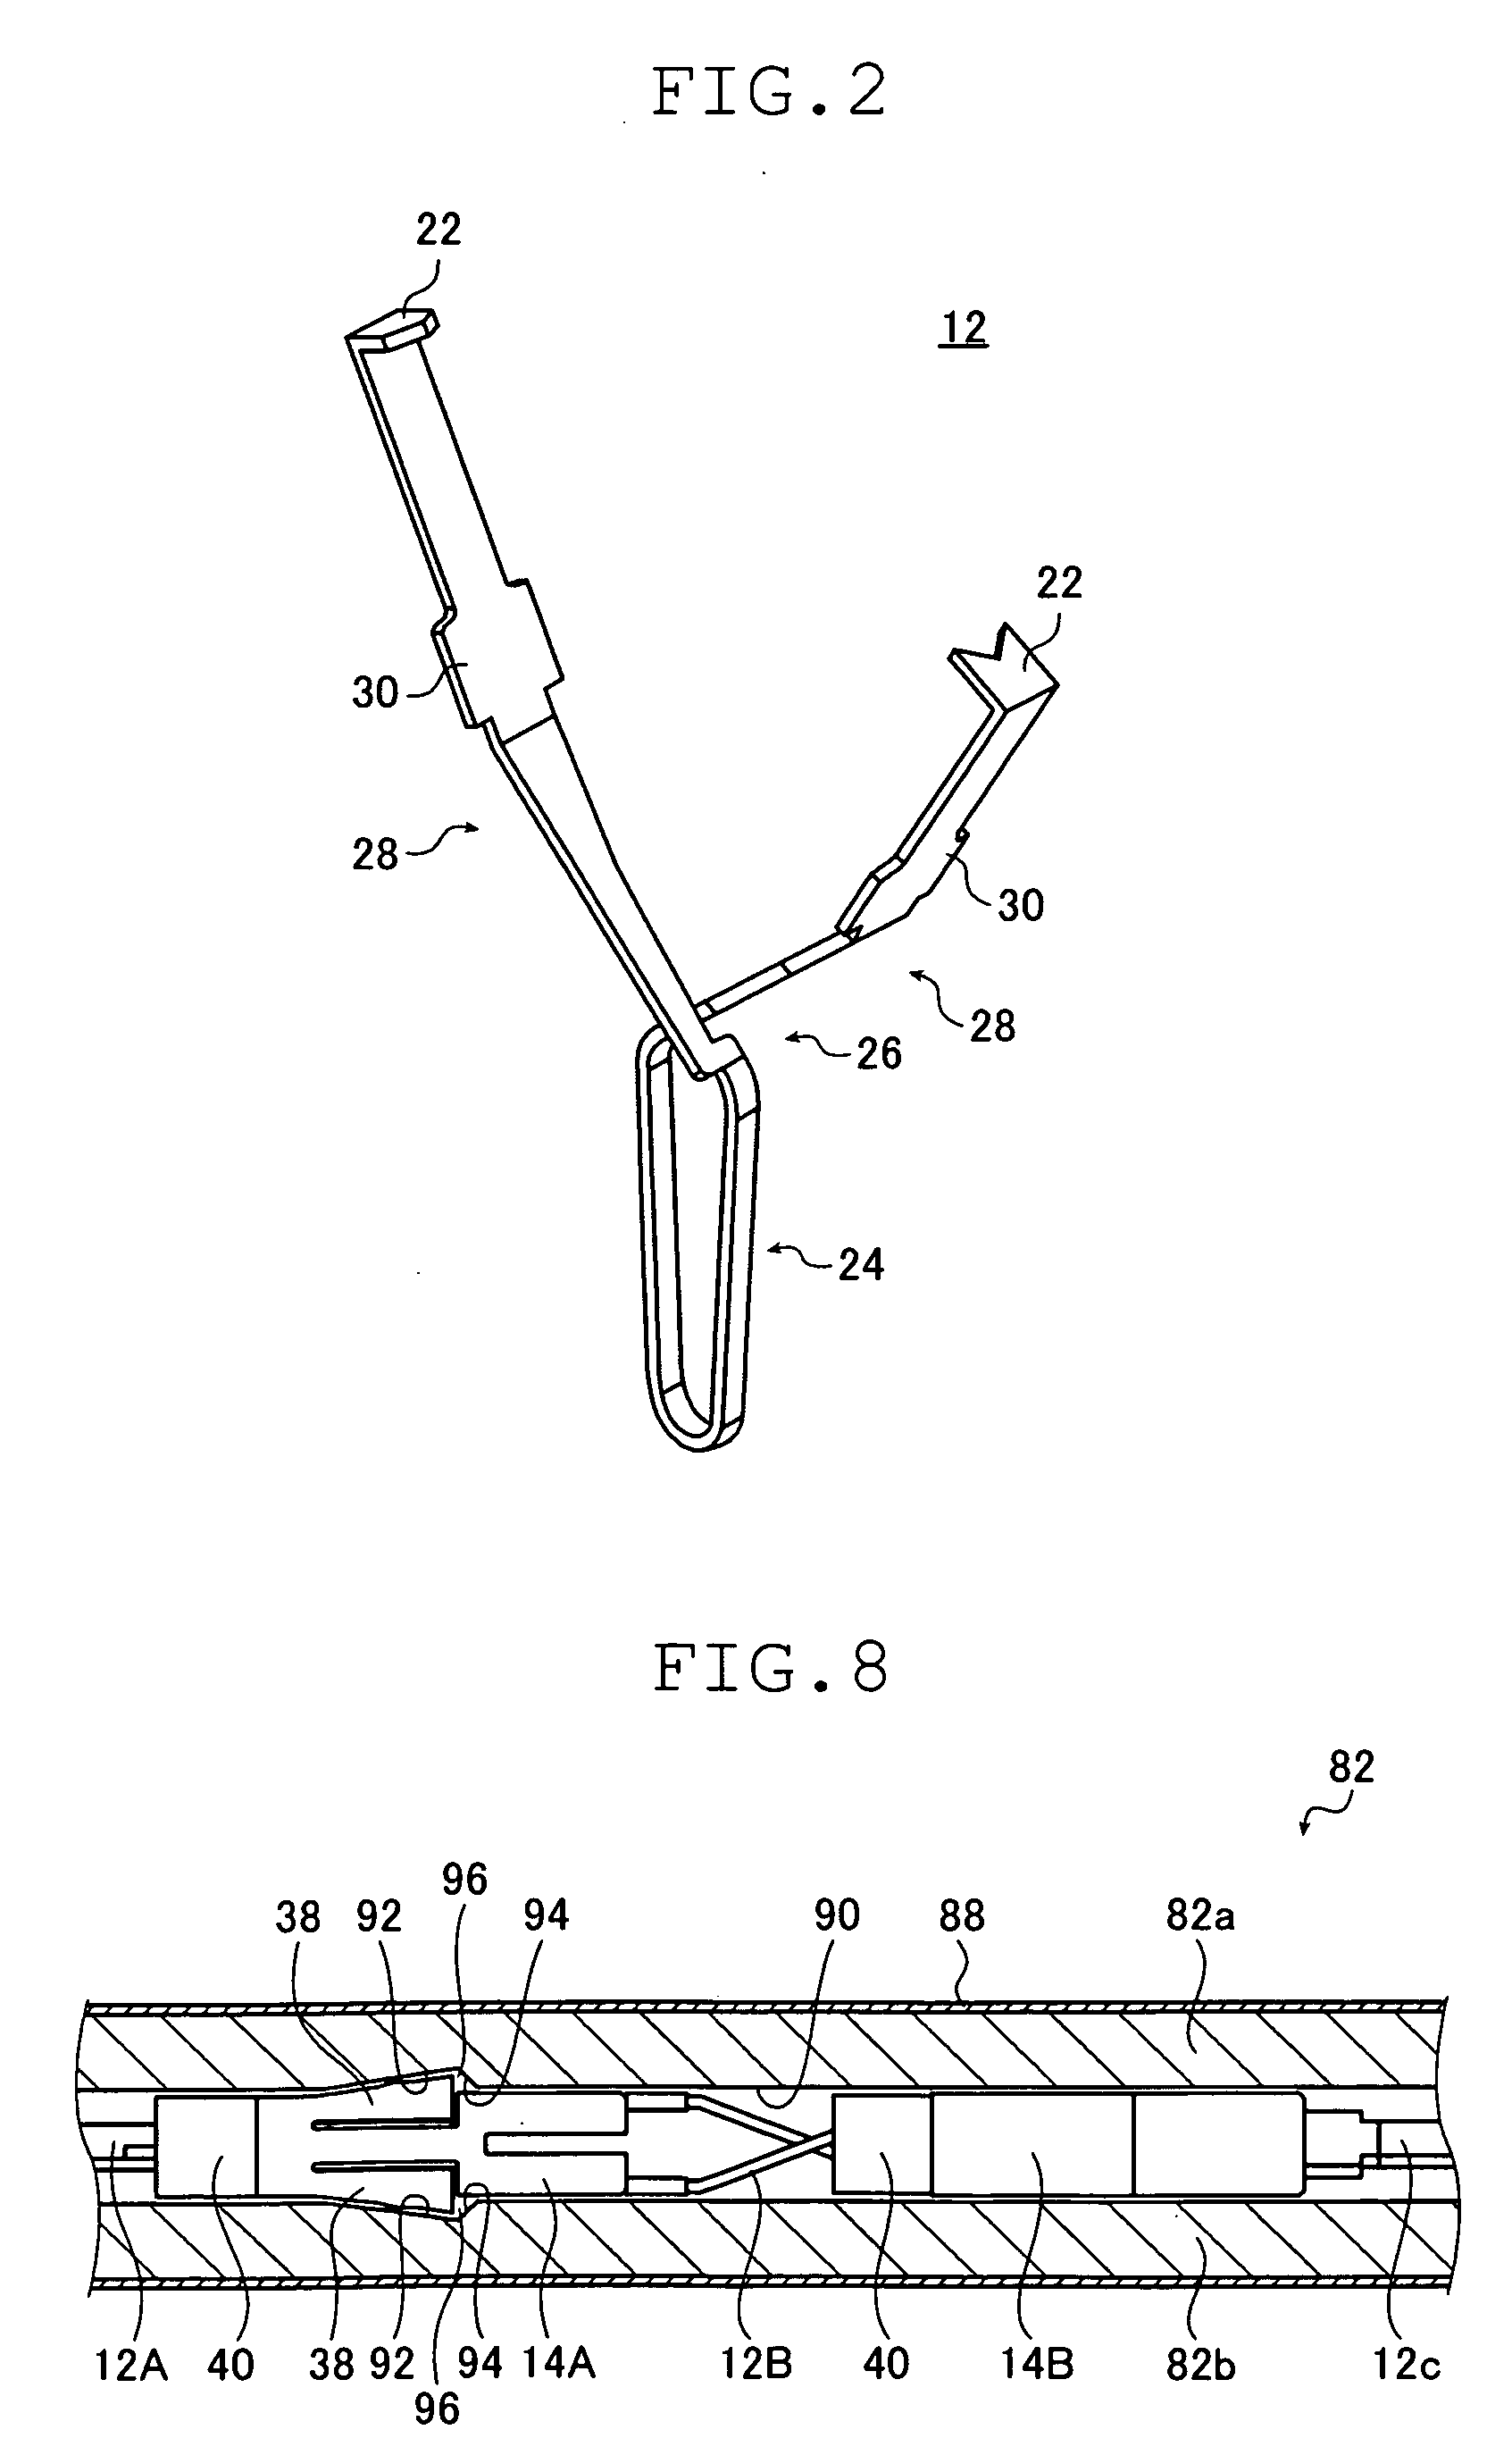 Clipping device